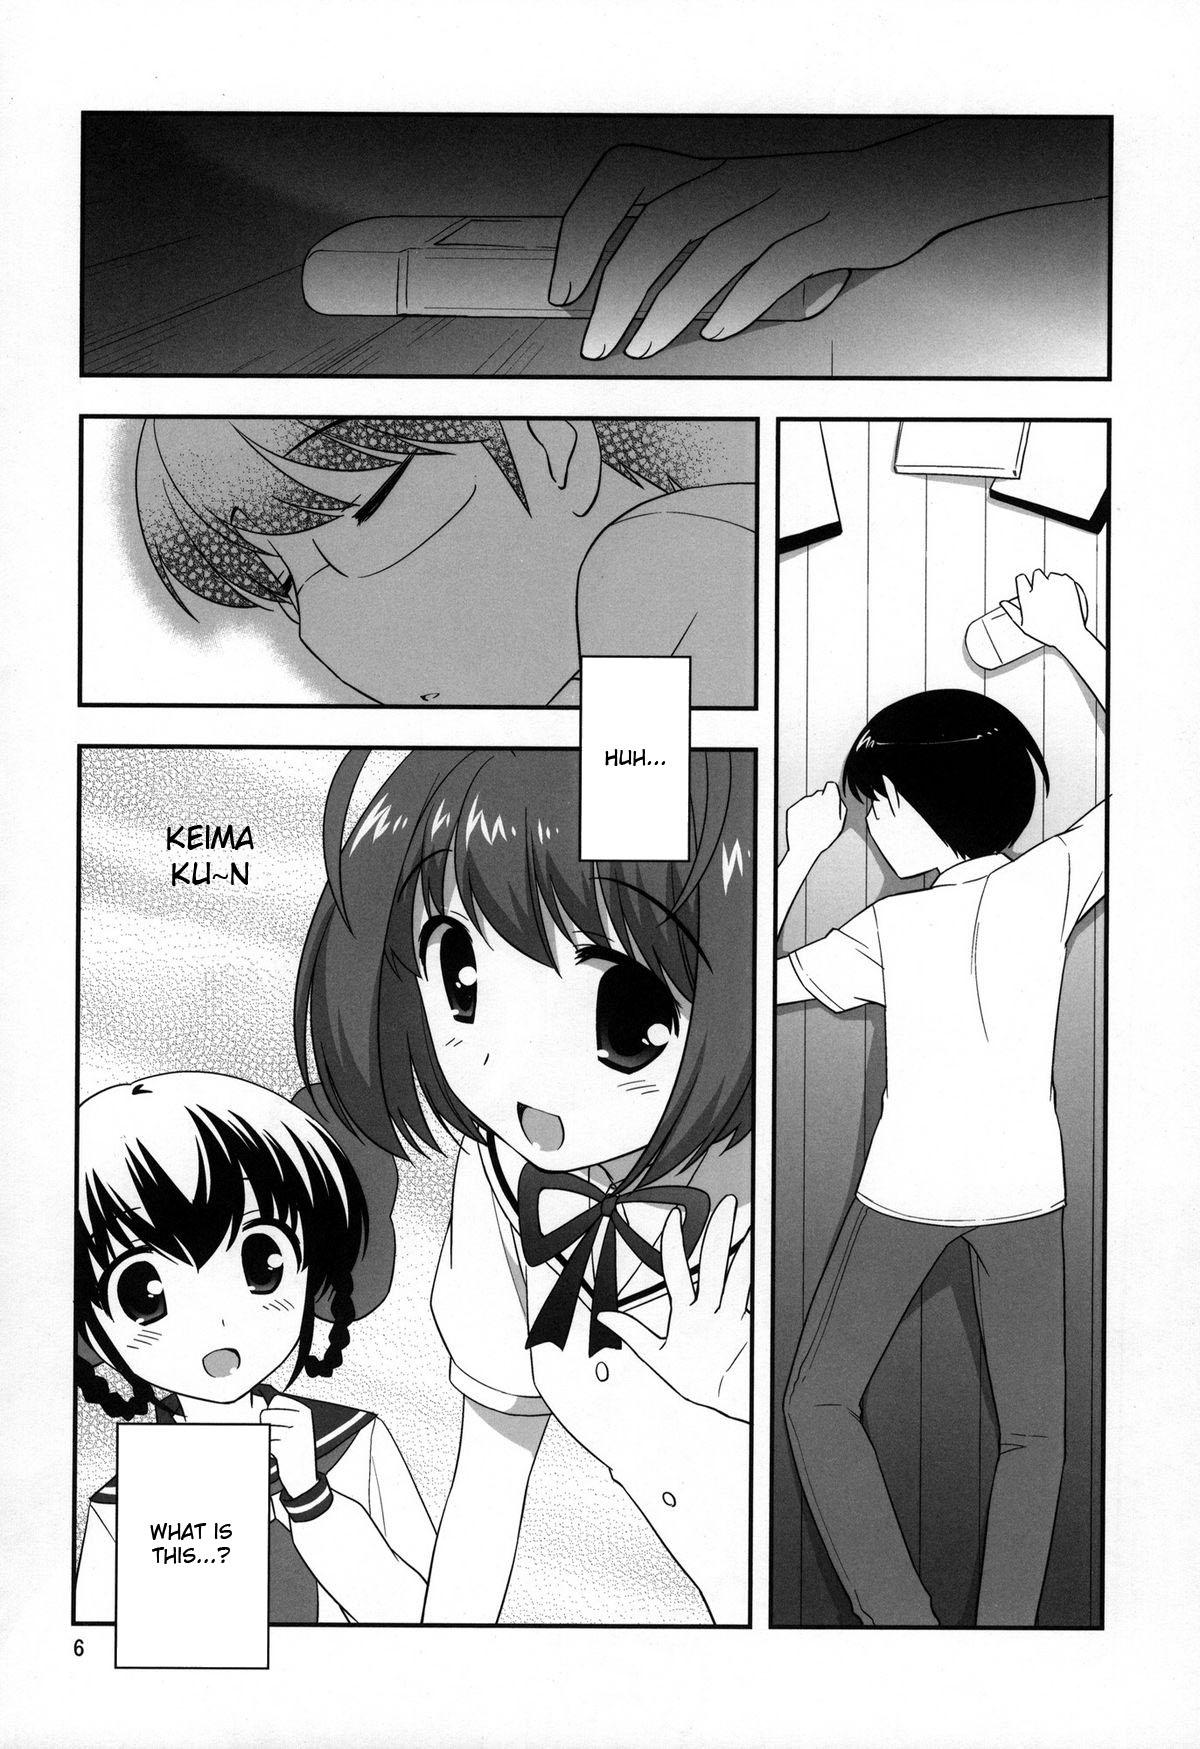 Tiny Tits Porn Yokkyuuuuun! - The world god only knows Porn - Page 5